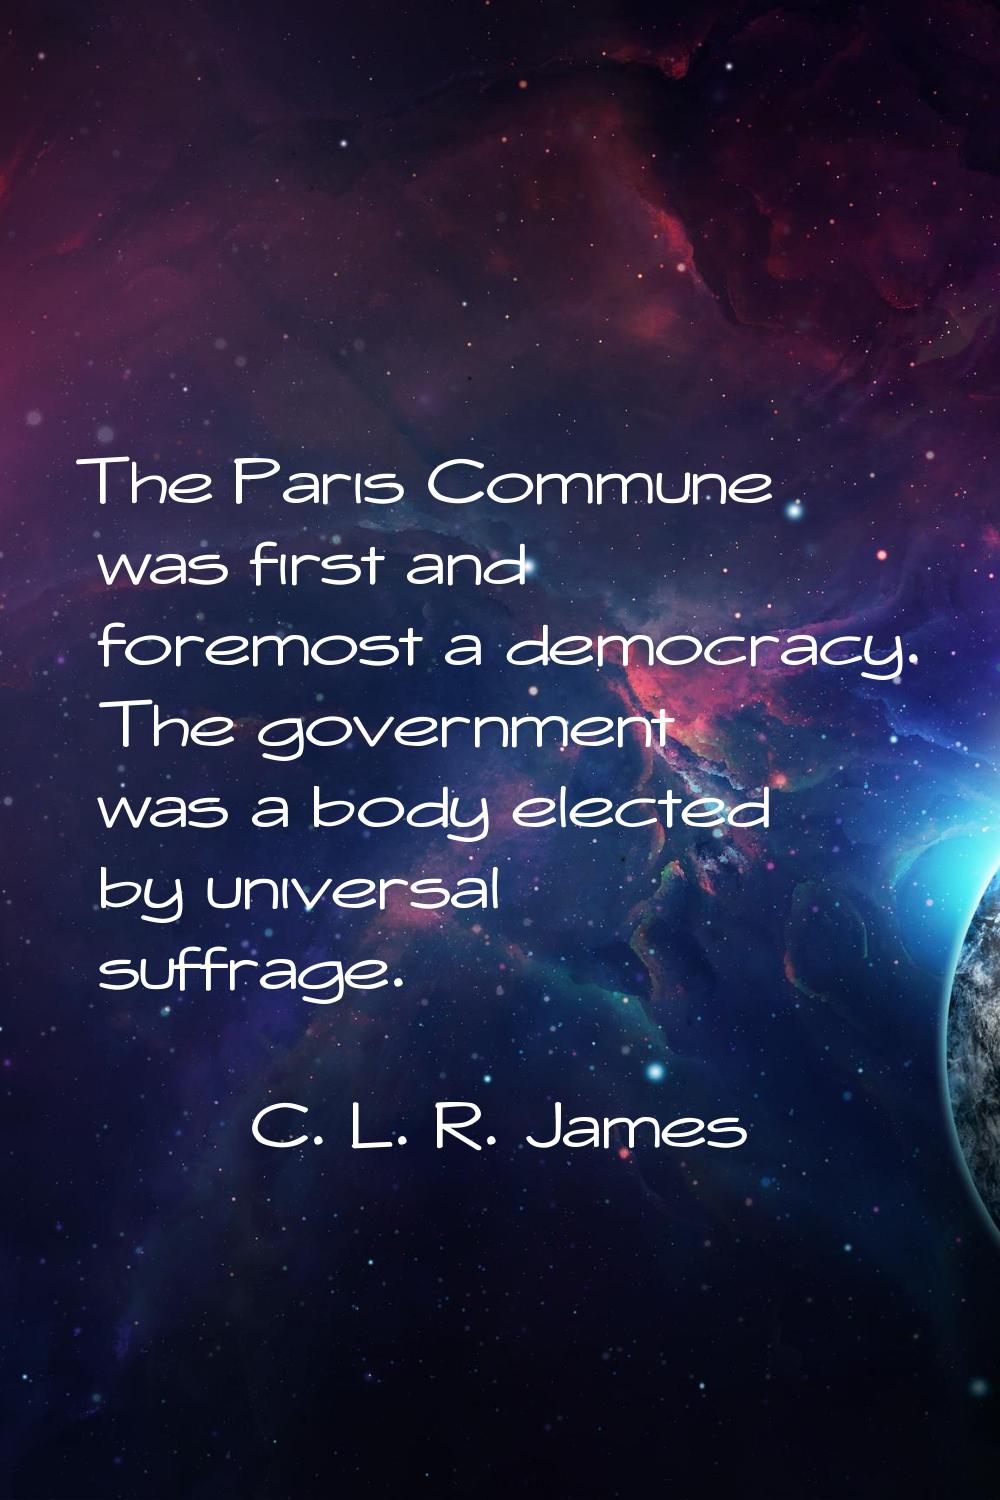 The Paris Commune was first and foremost a democracy. The government was a body elected by universa